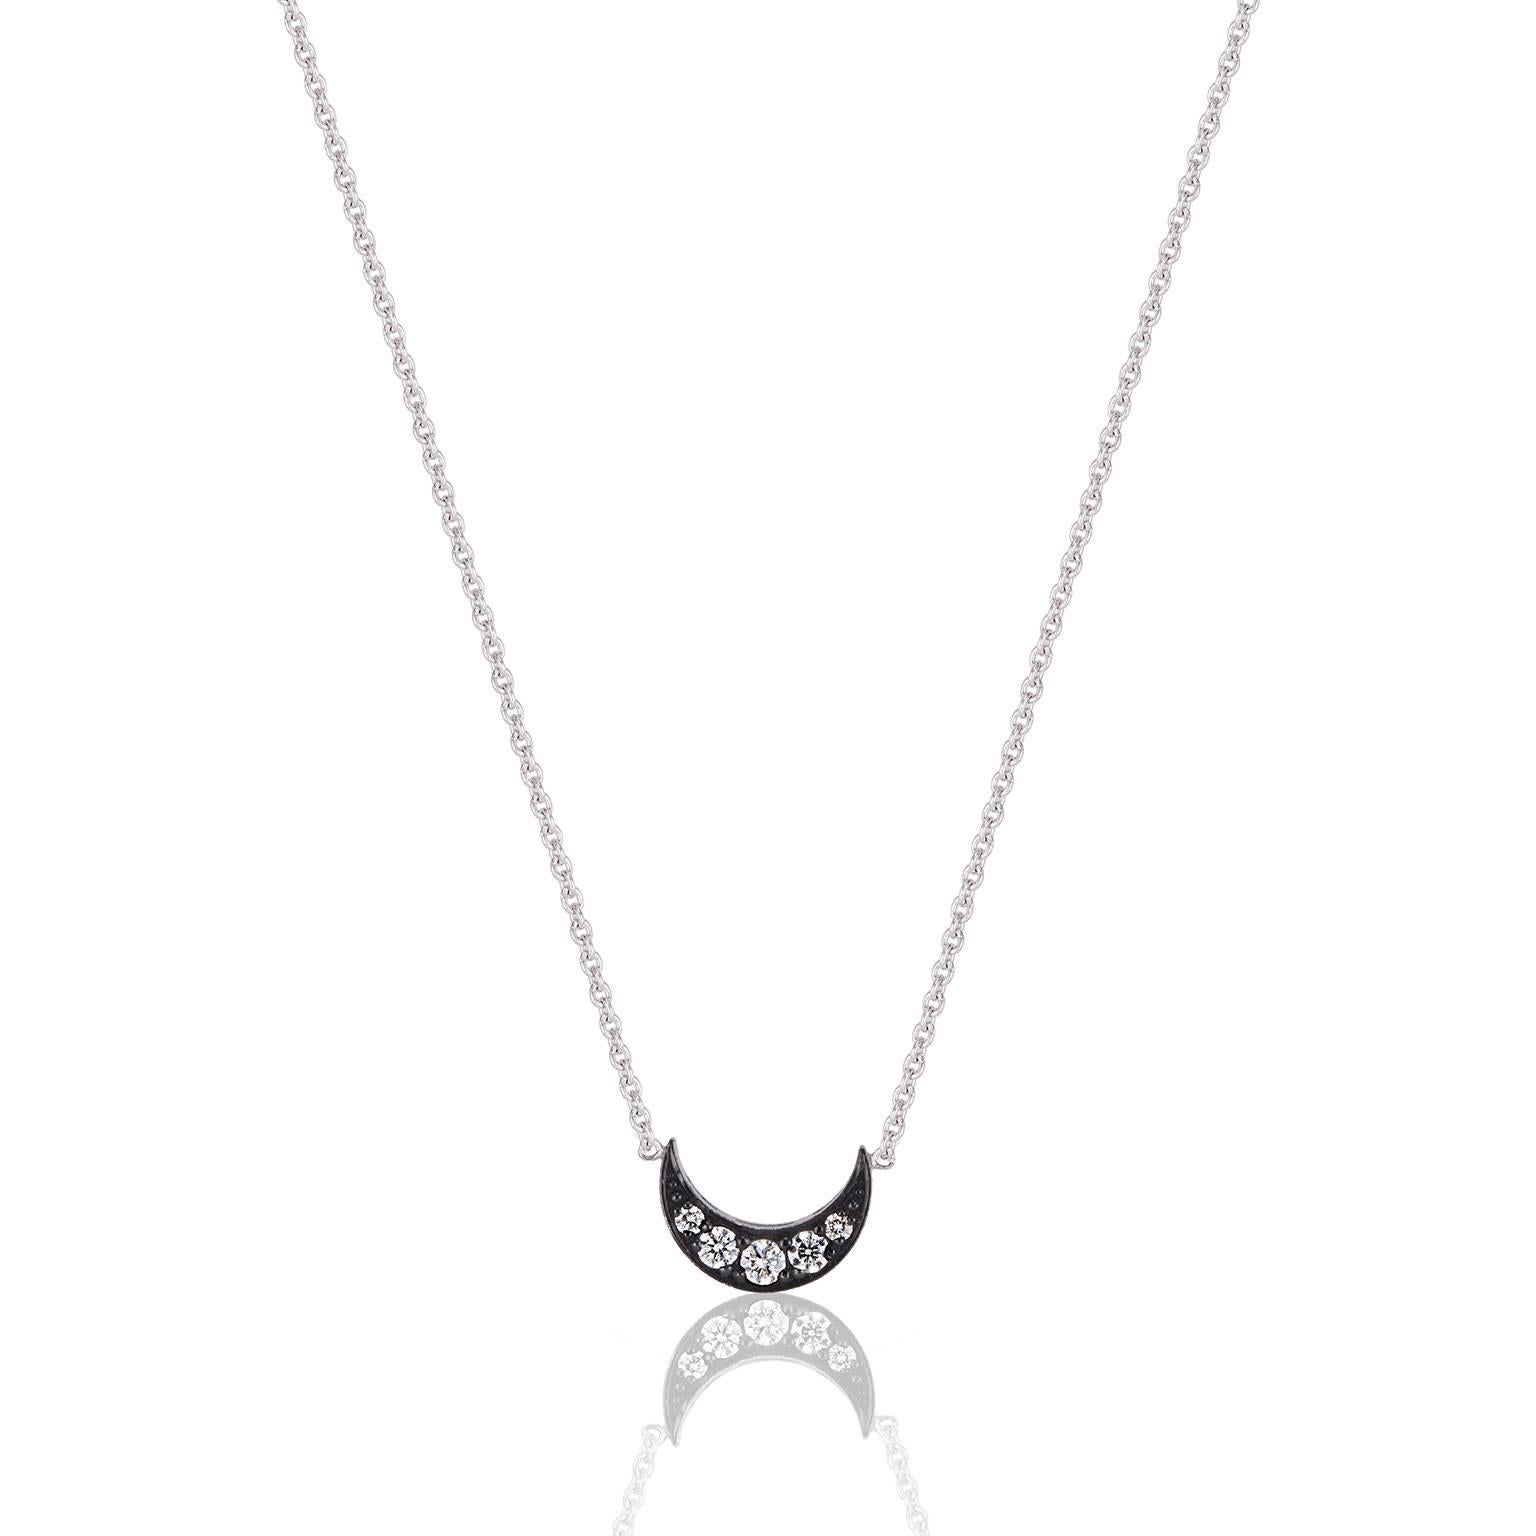 The subtle sparkle of the Crescent Pendant allows you to shine without being dominated by your jewellery, a thoroughly modern way to wear diamonds. The CRESCENT pendant from Cushla Whiting's Celestial Collection is made in 18 carat white gold with